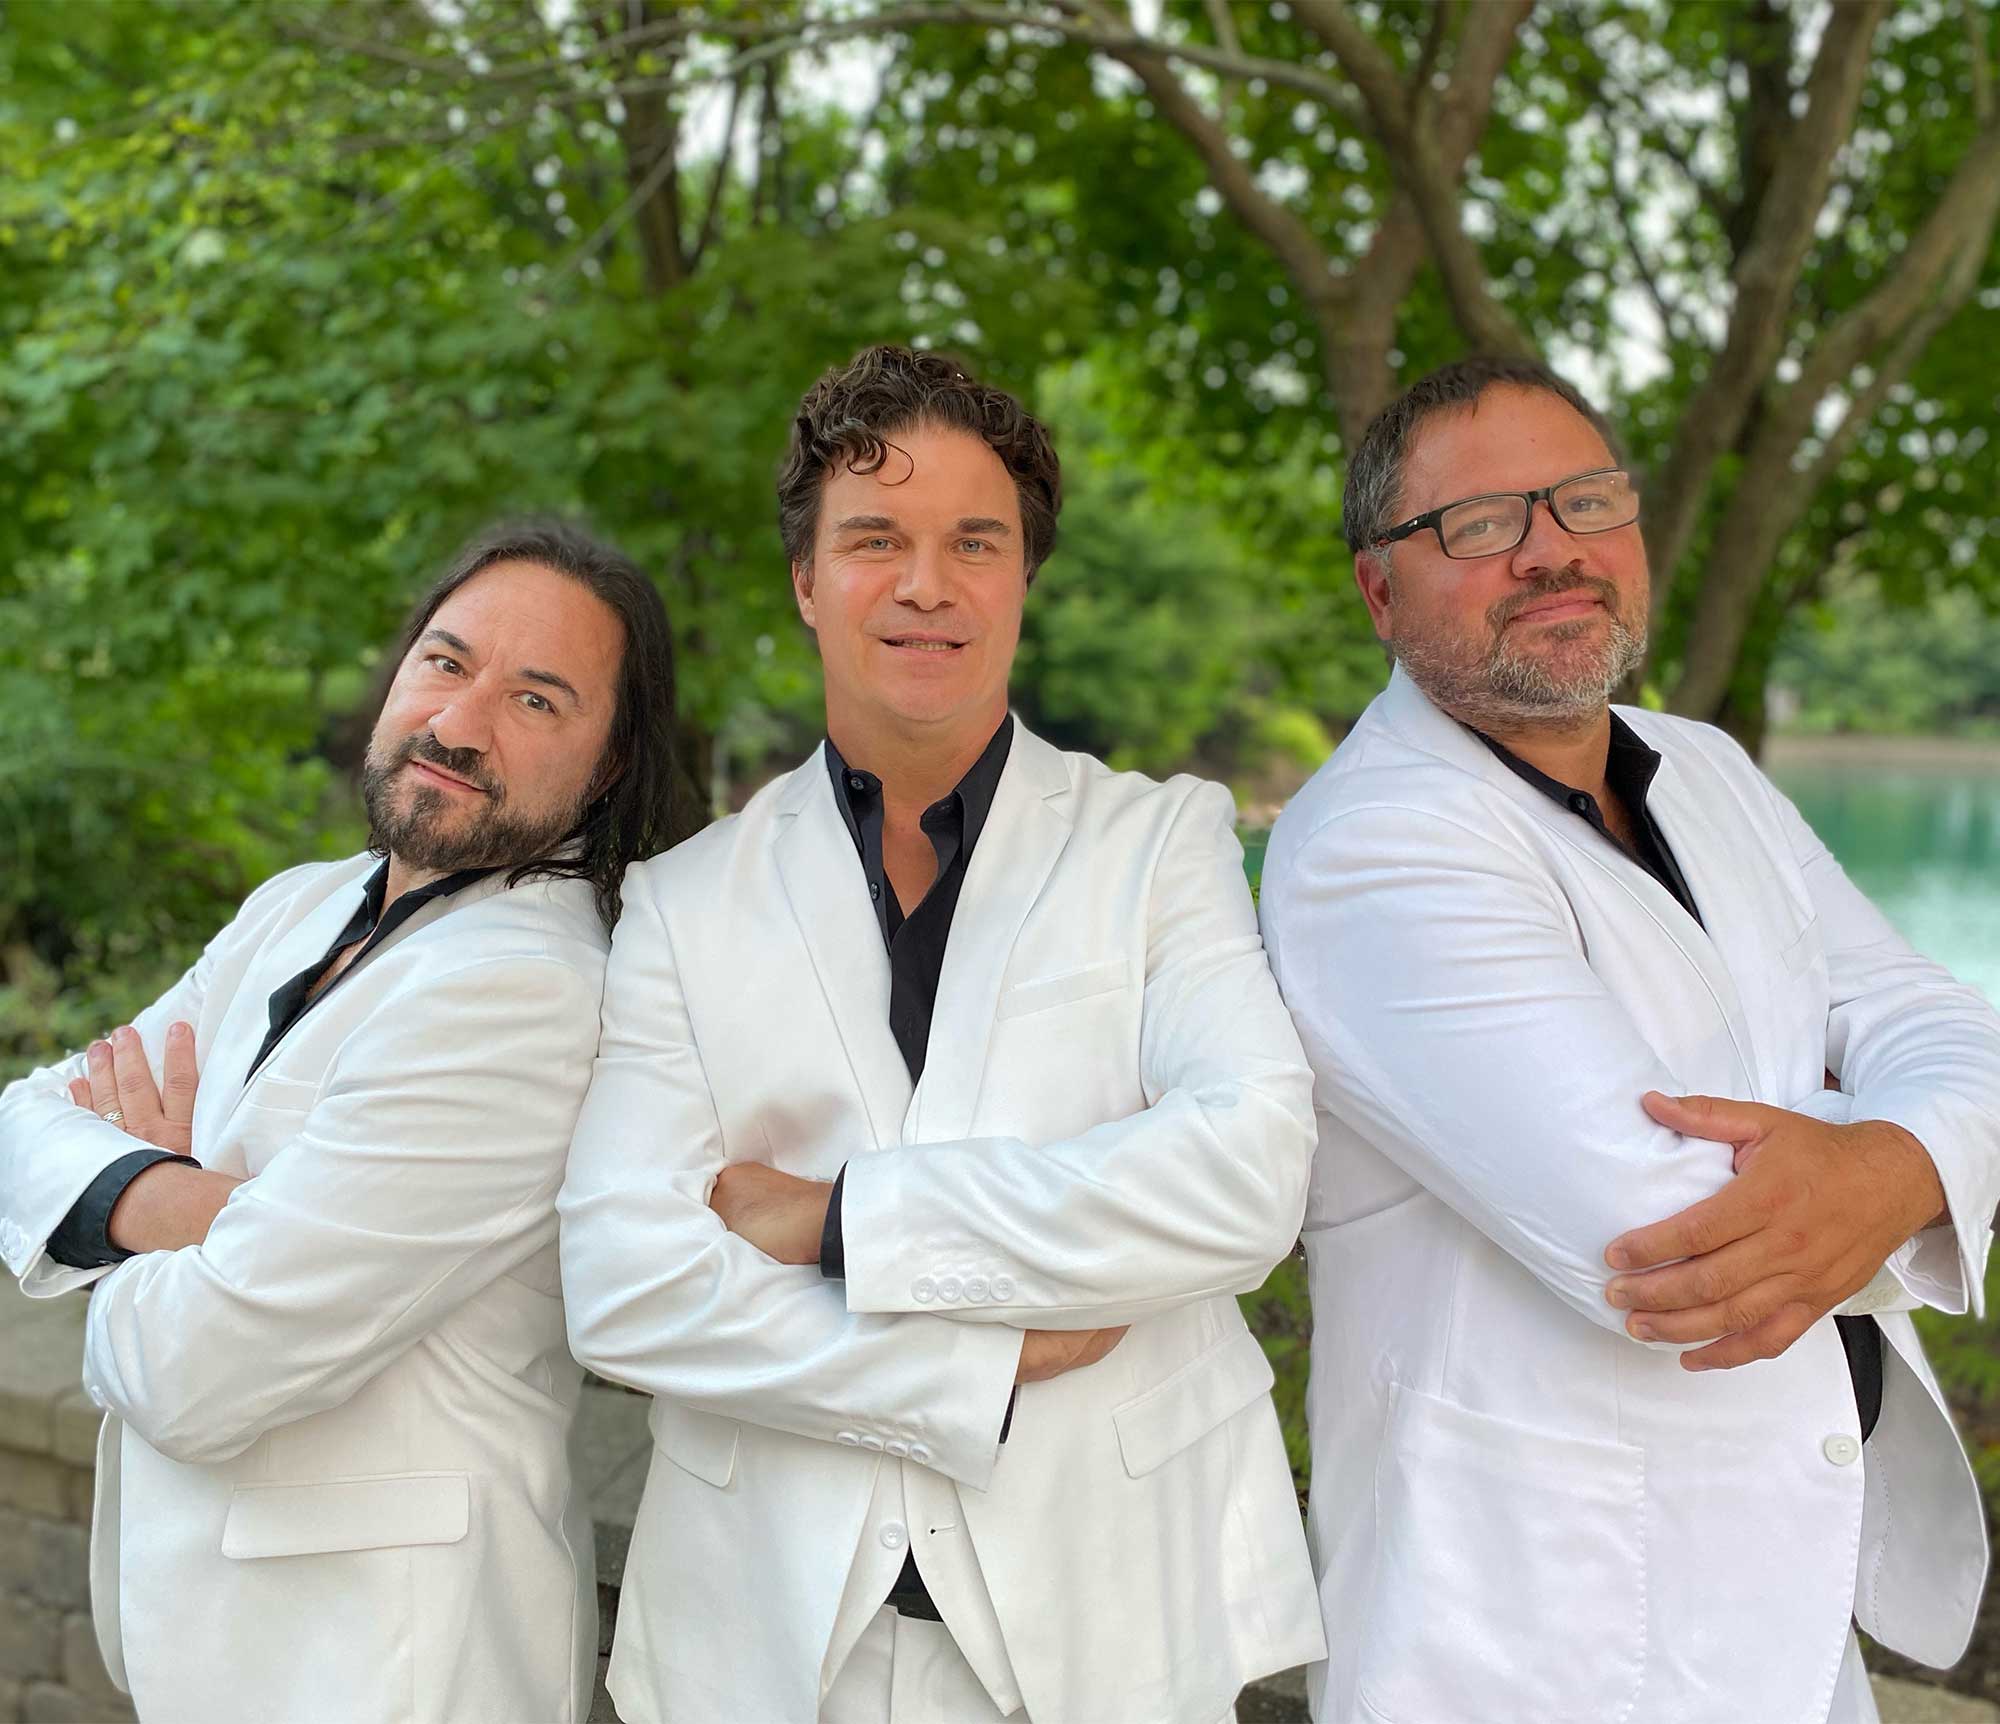 Brothers Gibb band members in white suits with black button downs underneath.